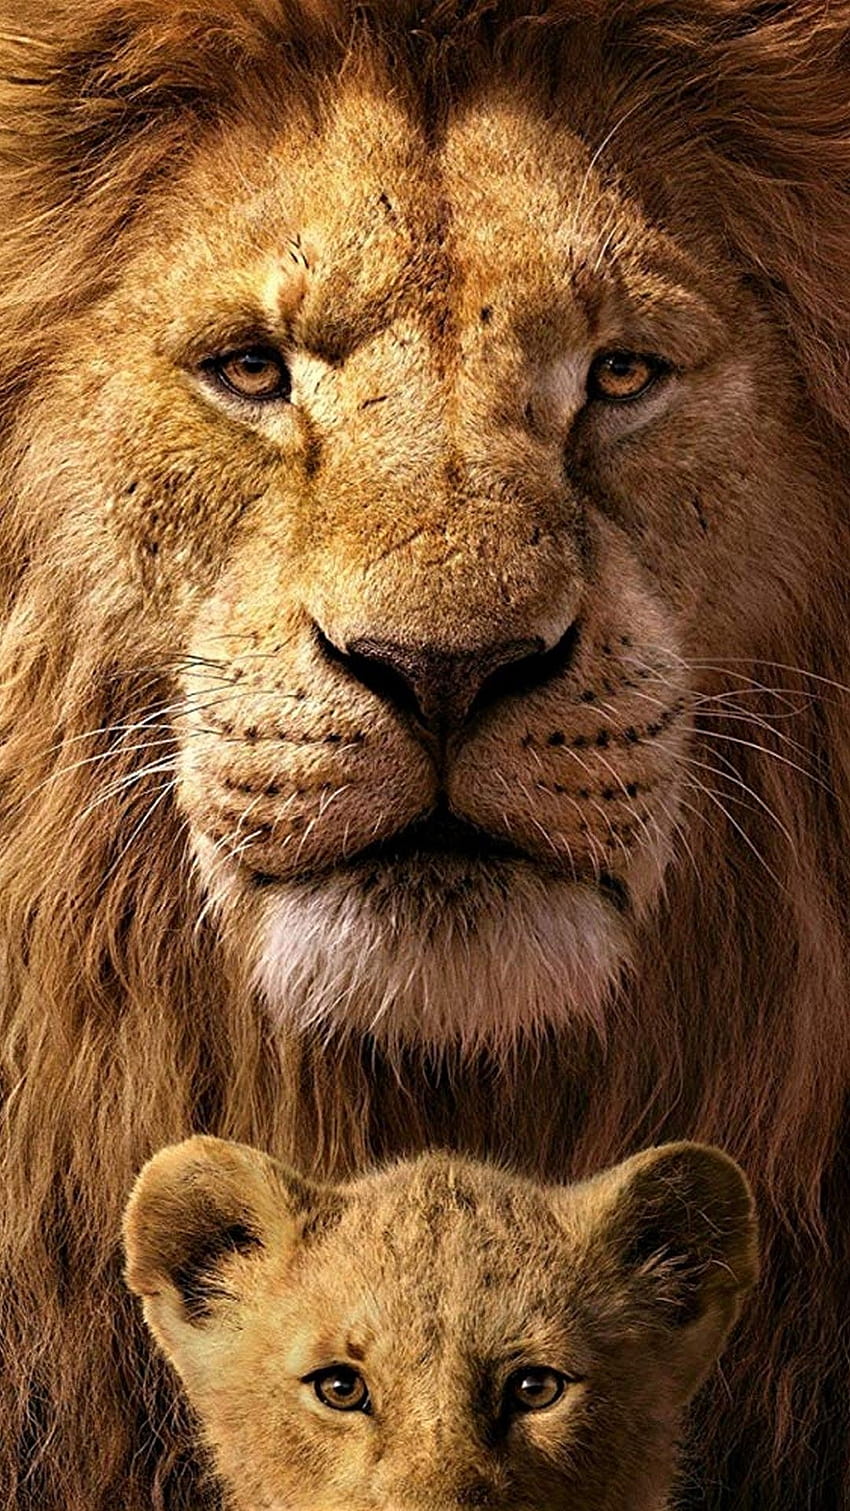 1080p HD Lion Full Hd Wallpaper High Quality Desktop iphone and android   Background and Wallpaper    Lion wallpaper Hd nature wallpapers  Cartoon wallpaper hd